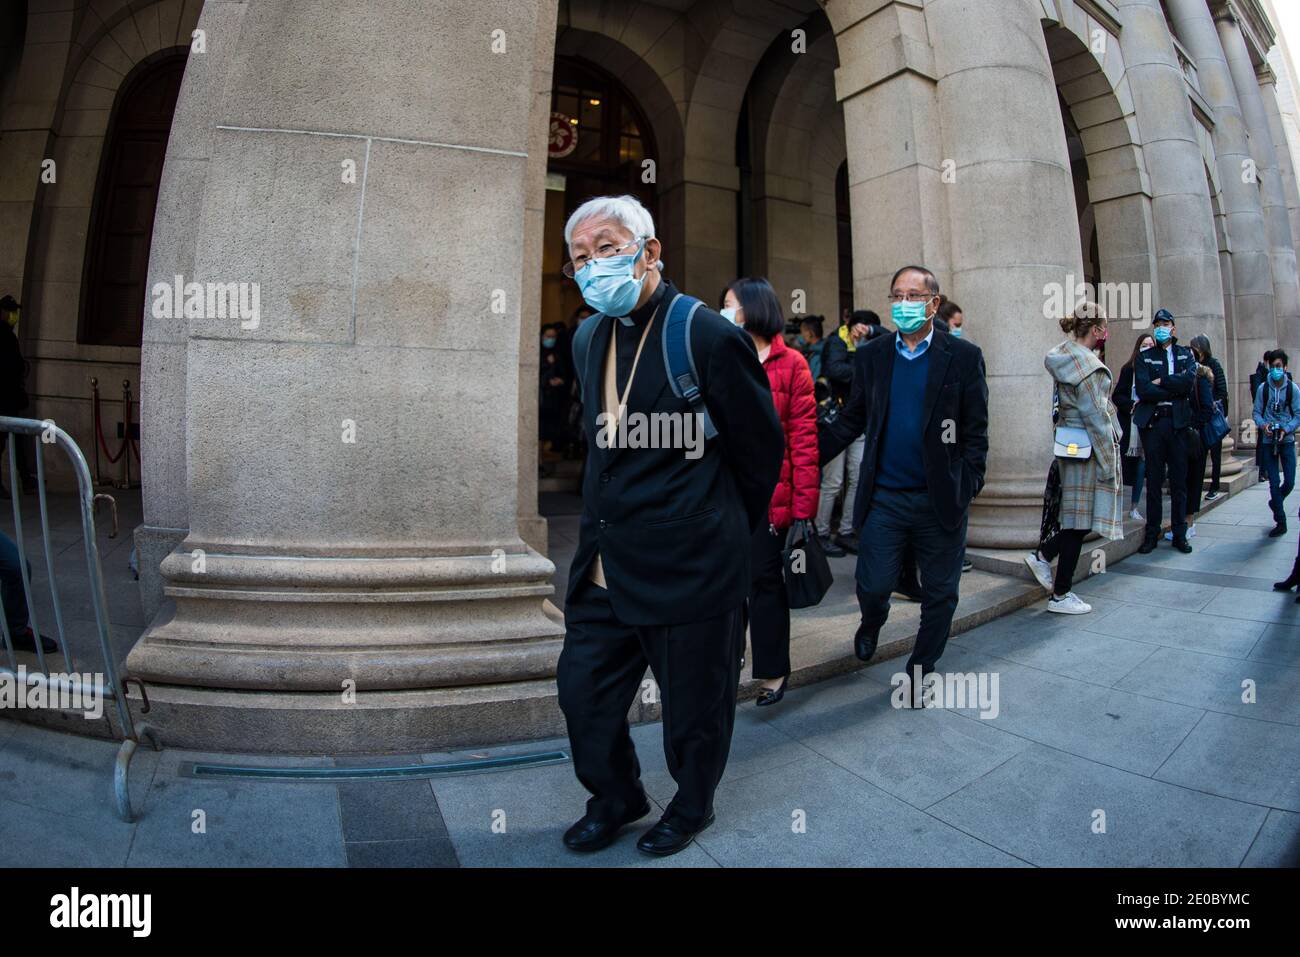 Hong Kong, China. 31st Dec, 2020. Cardinal Zen, the former archbishop of Hong Kong exits the Court of Final Appeal after an urgent hearing requested by the Department of Justice on the bail granted to Media Tycoon Jimmy Lai for alleged National Security Law breaches. Credit: Marc R. Fernandes/Alamy Live News Stock Photo